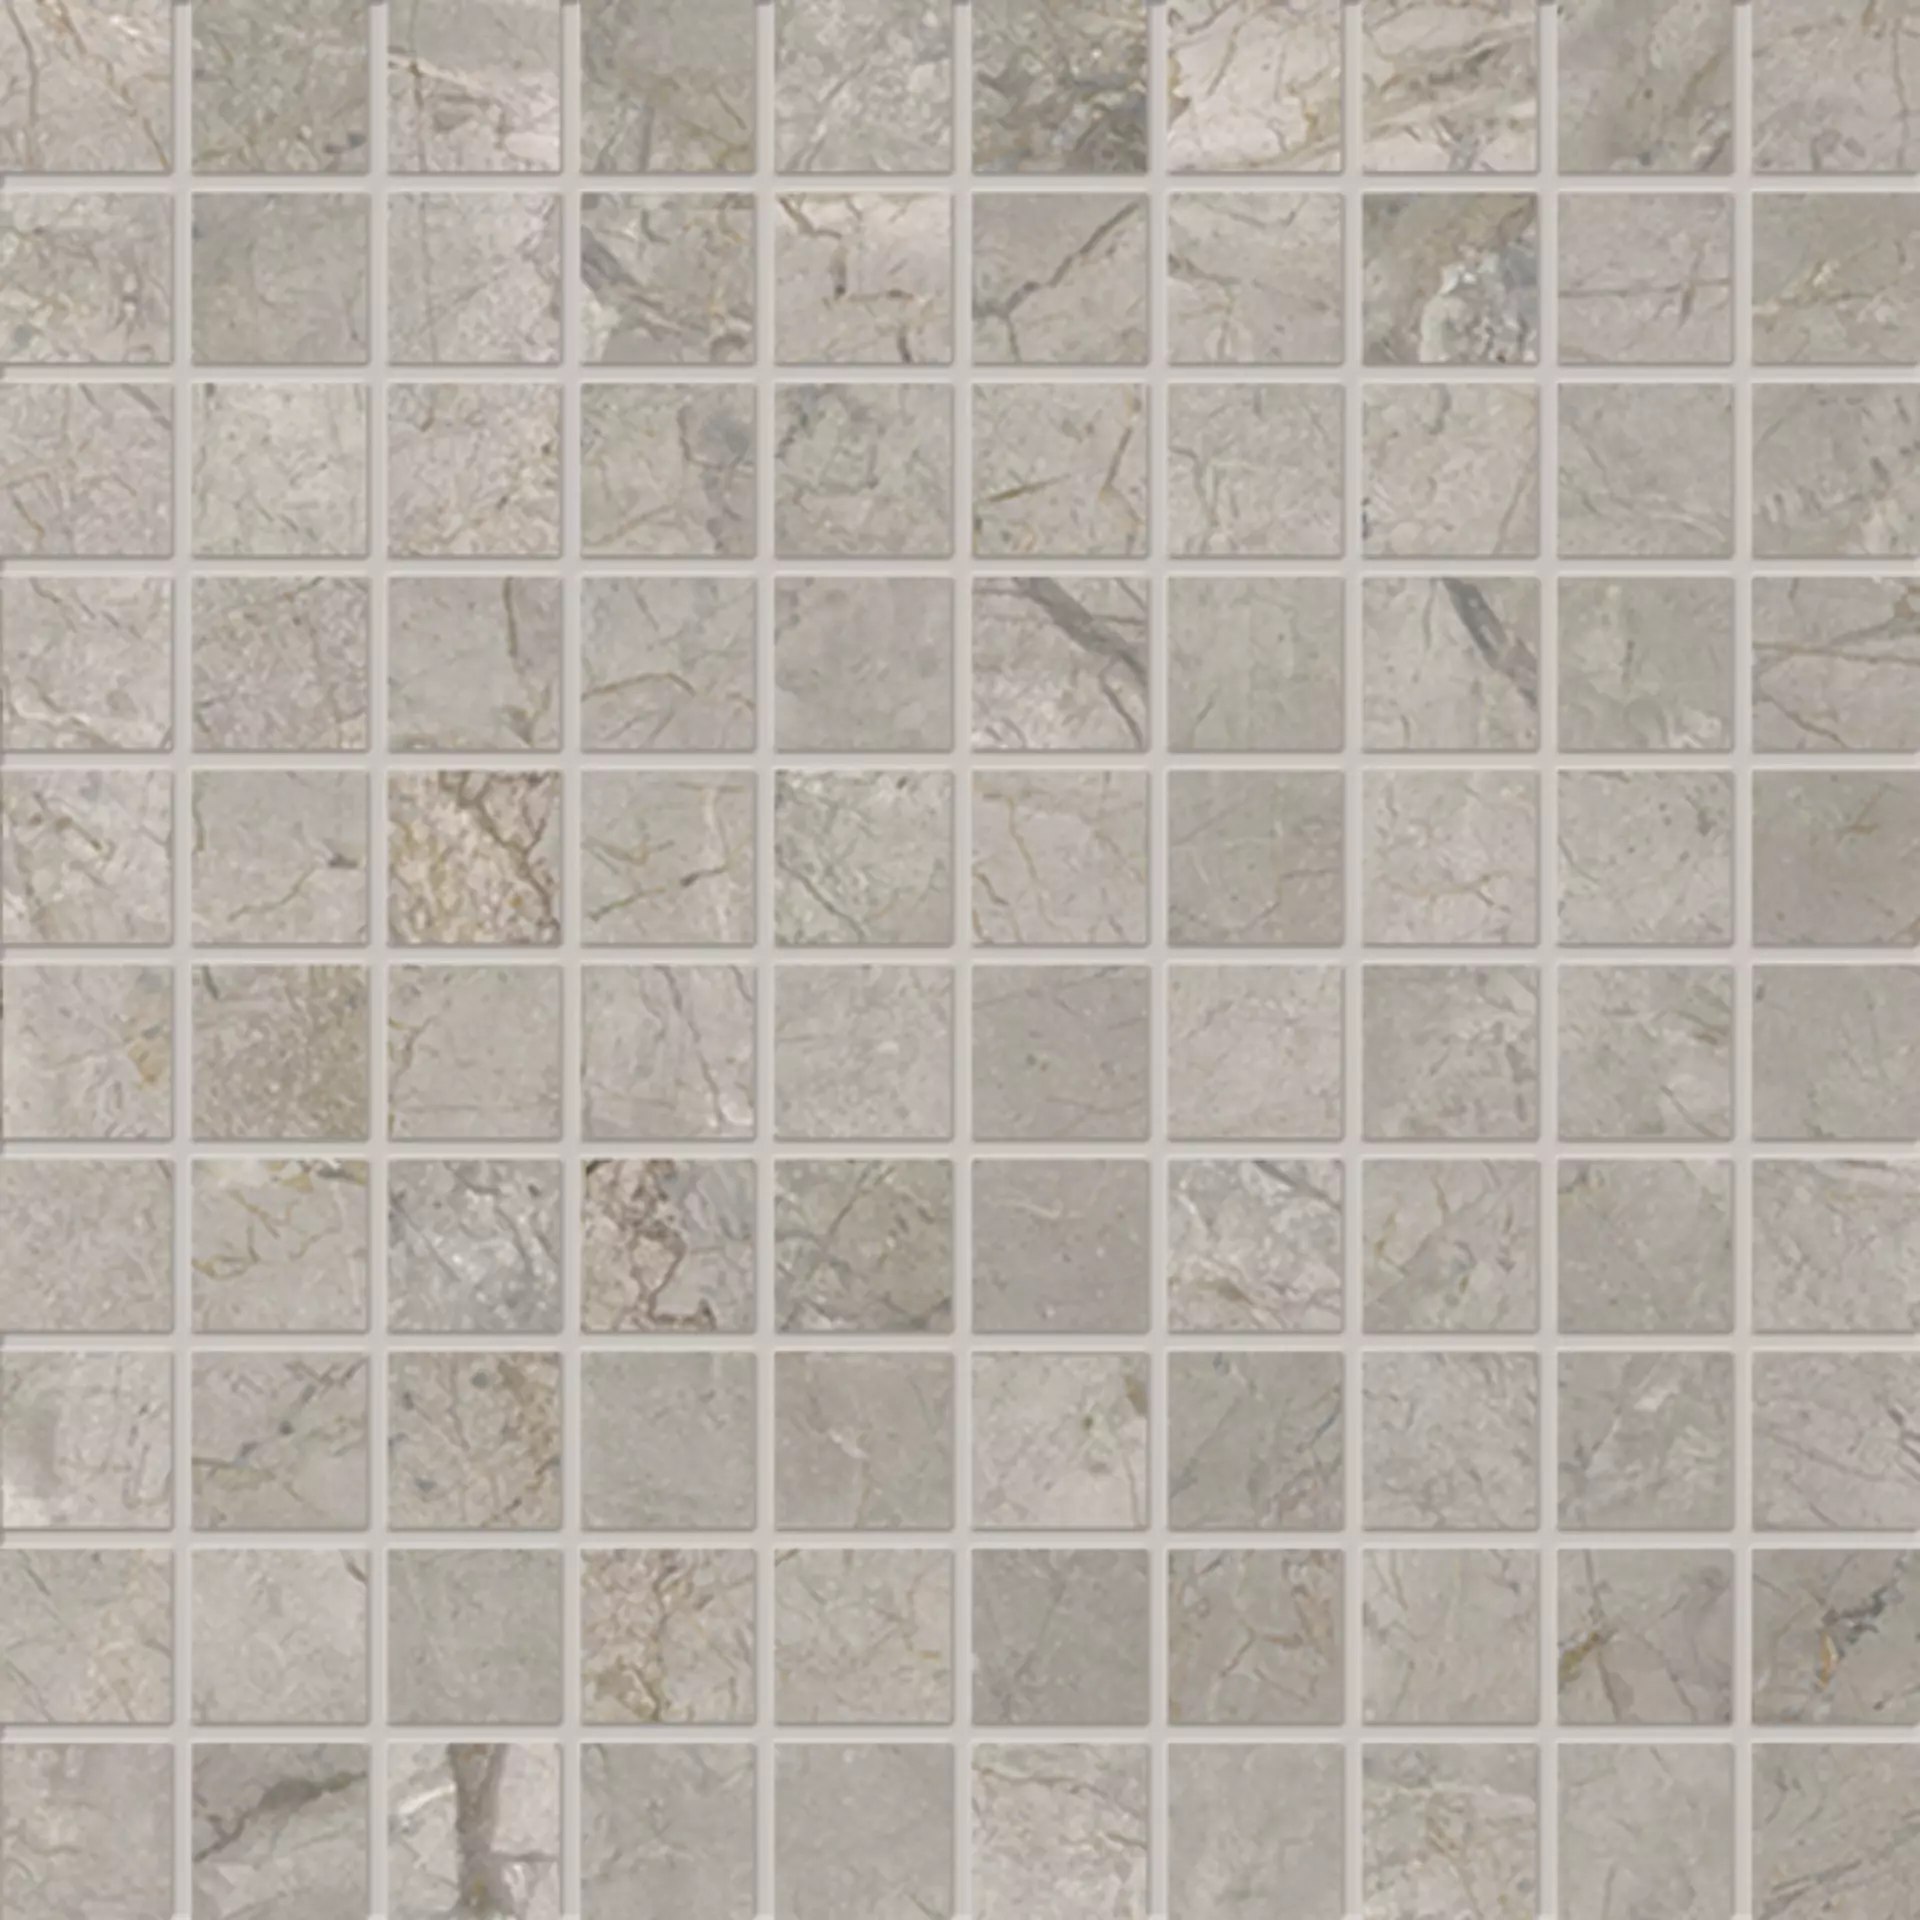 Keope Elements Lux Silver Grey Lappato Mosaic 41324D32 30x30cm rectified 9mm